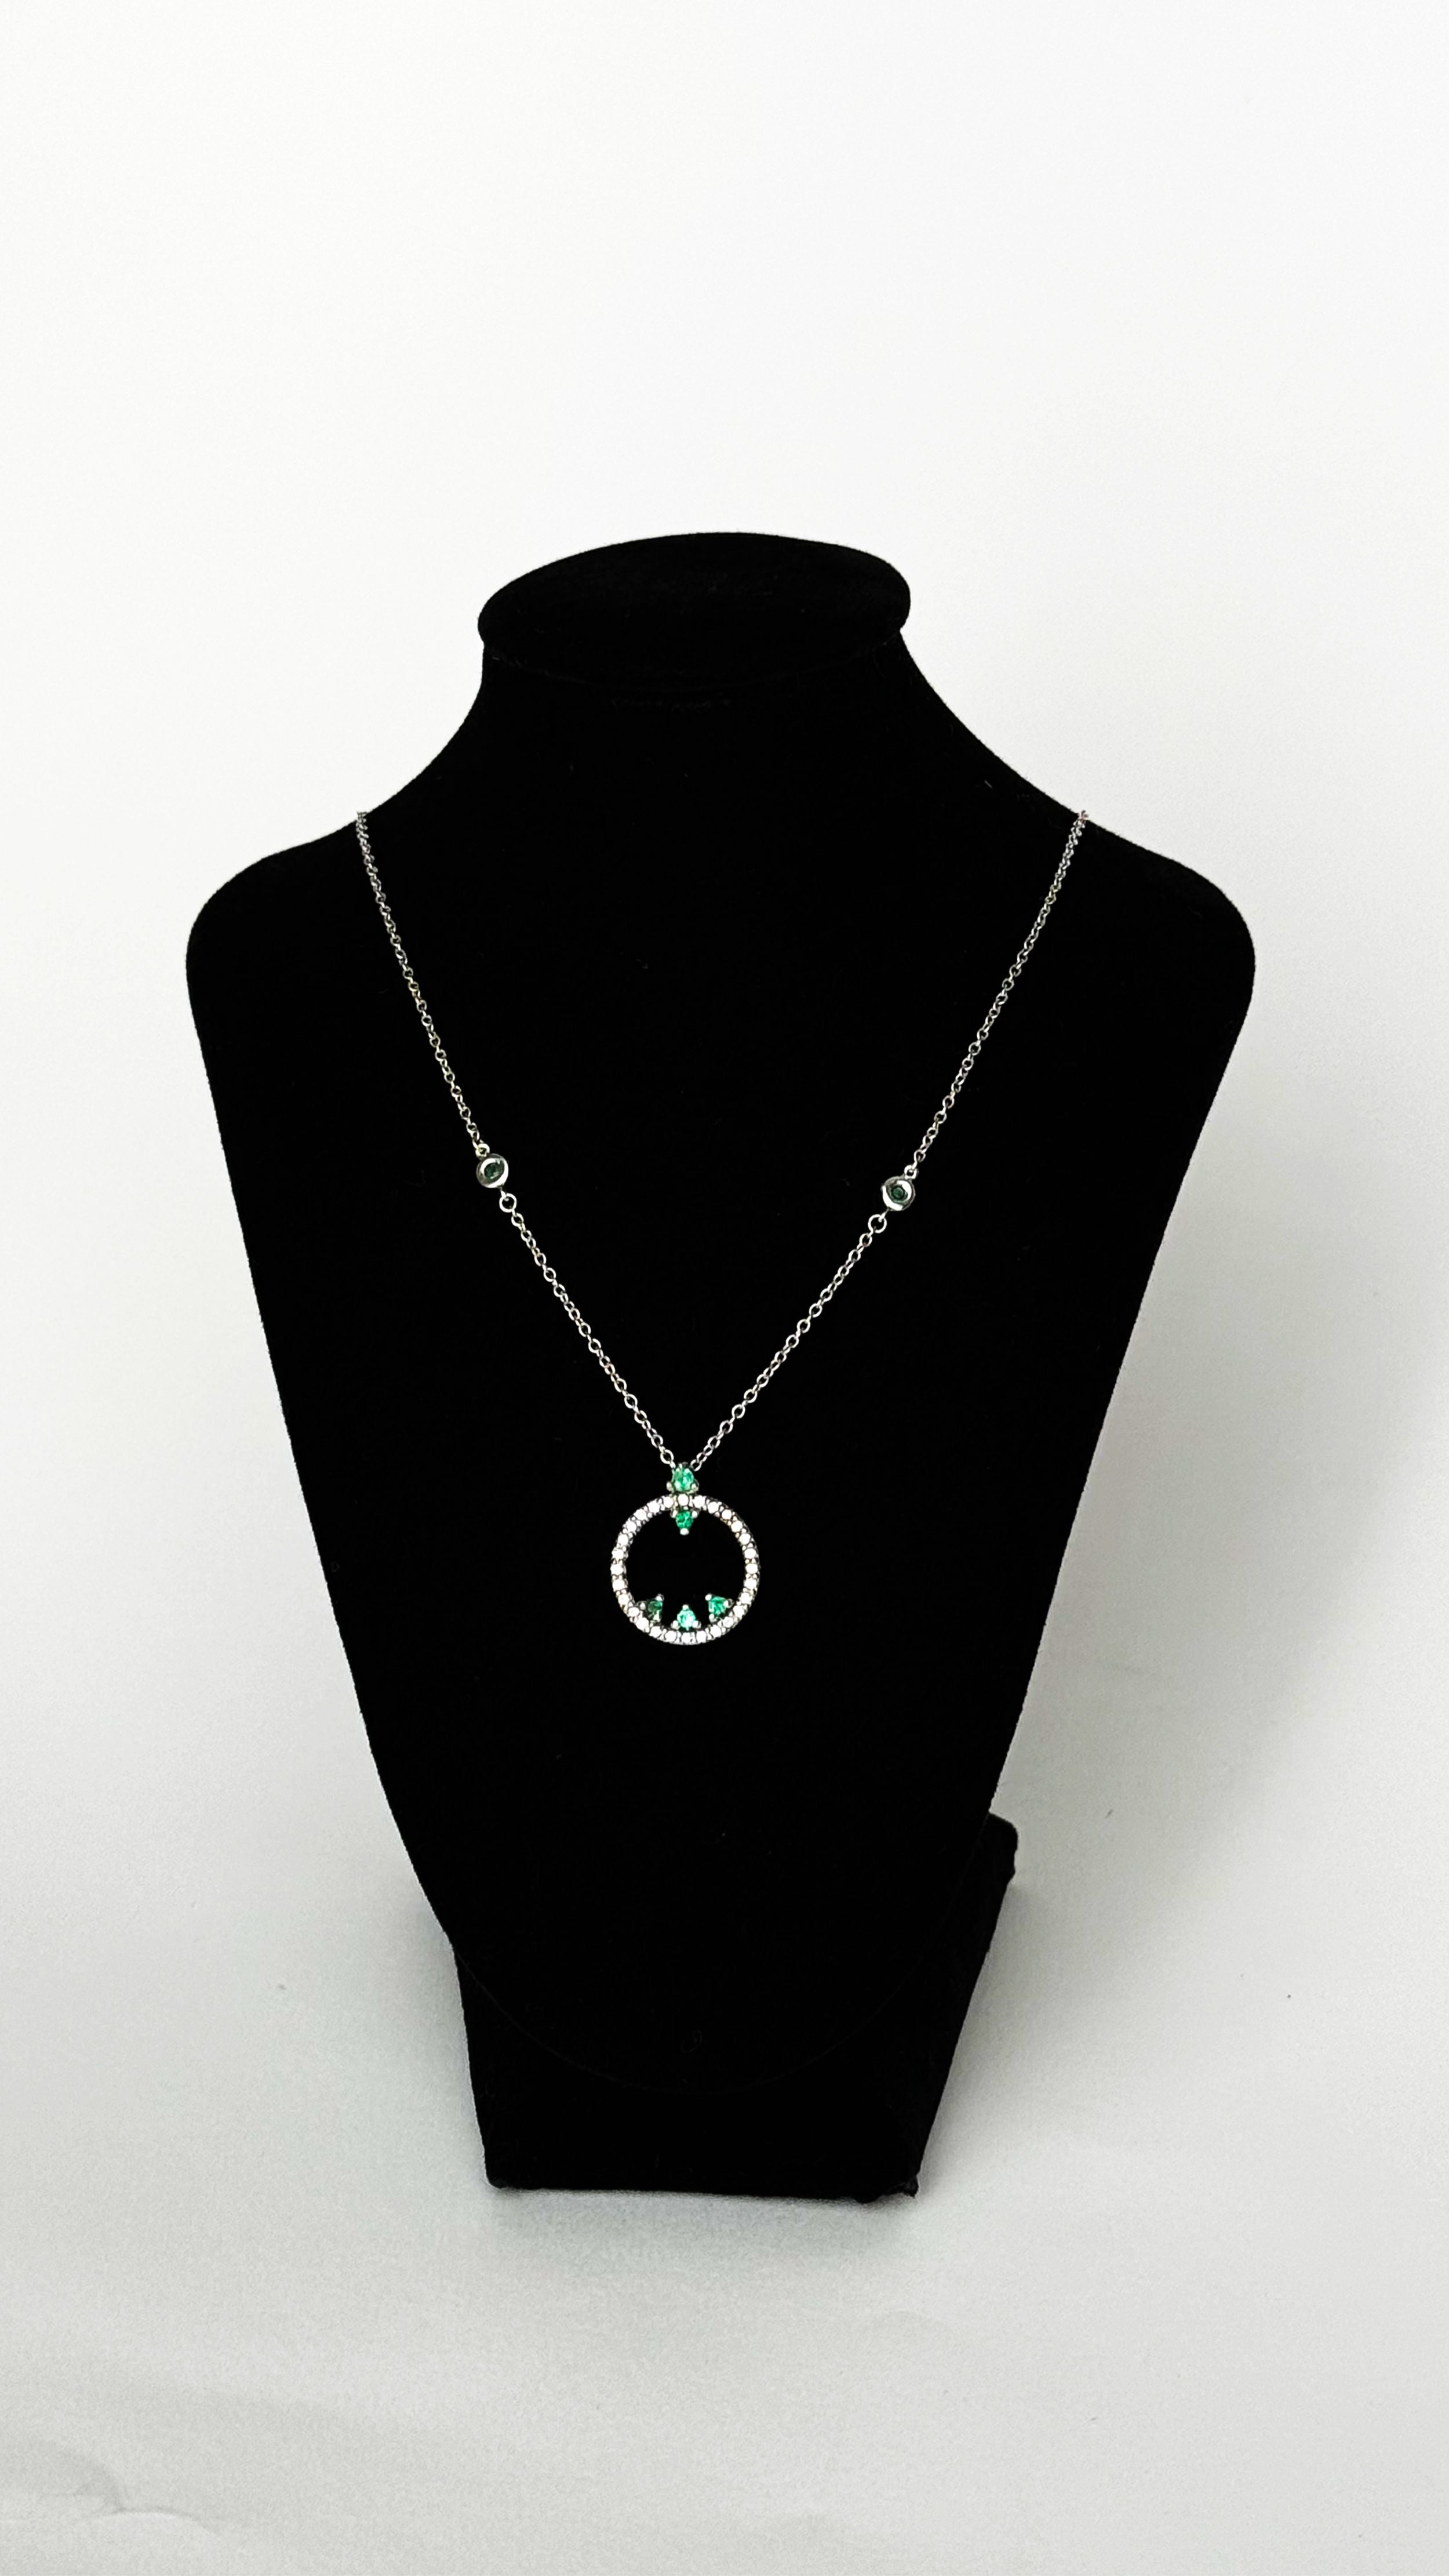 Conde de diamante Minimal Esmeralda Pendant Necklace 18K white gold, art deco-inspired circle design with paved diamond stones and emerald detailing. The 18K white gold chain is accented with emerald links. Photo on necklform